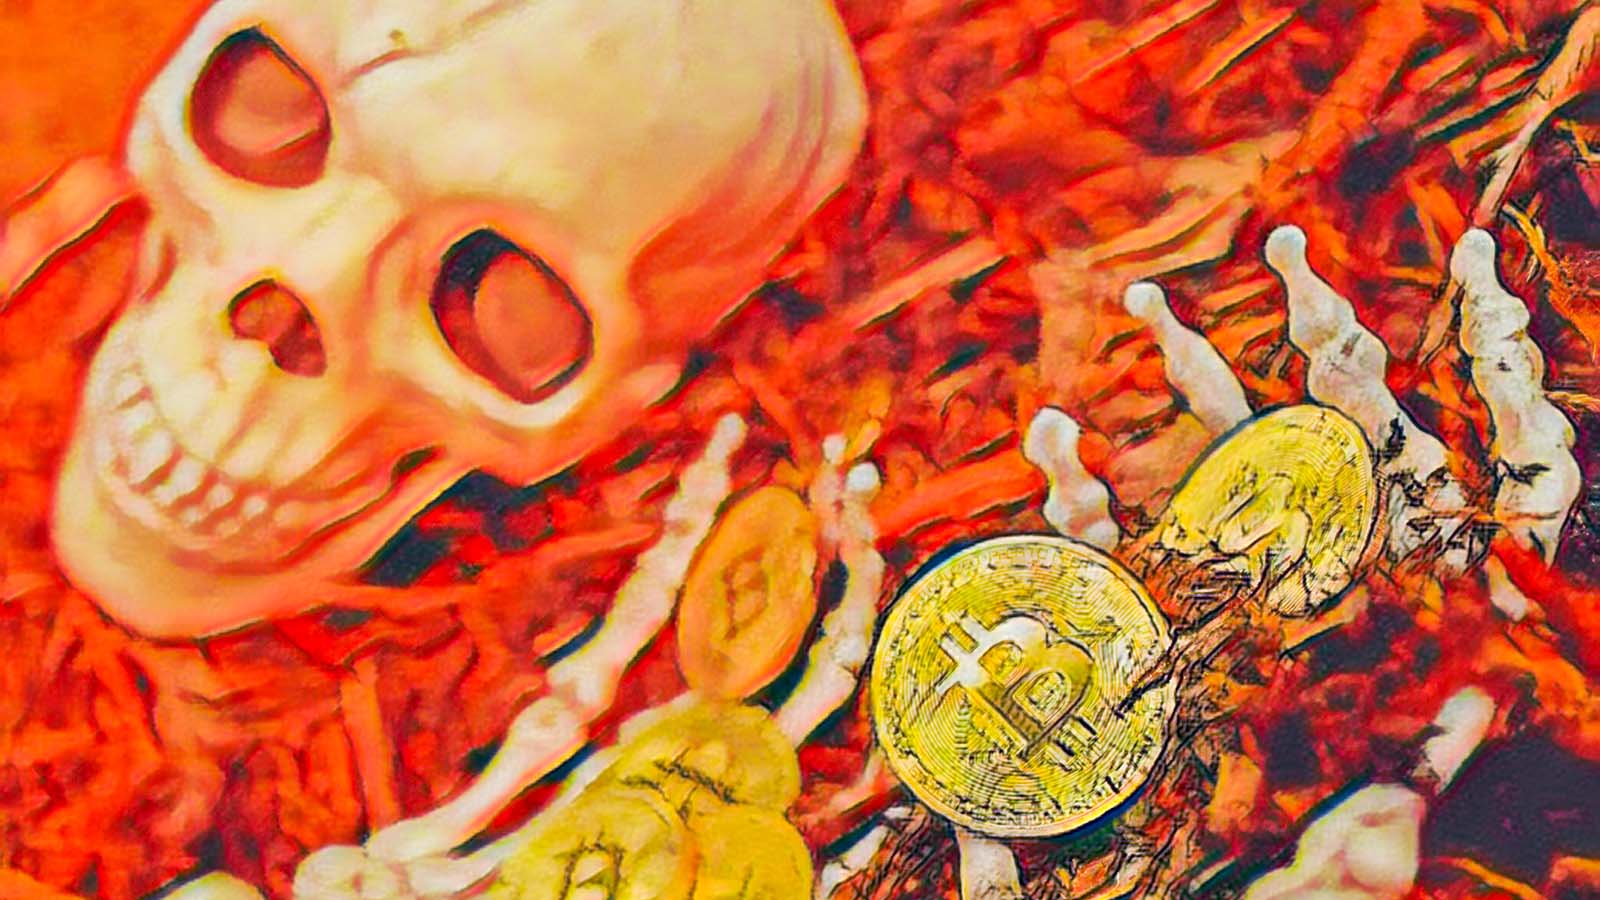 A concept image of a flaming skeleton with BTC tokens in its hand representing ProShares Short Bitcoin ETF.